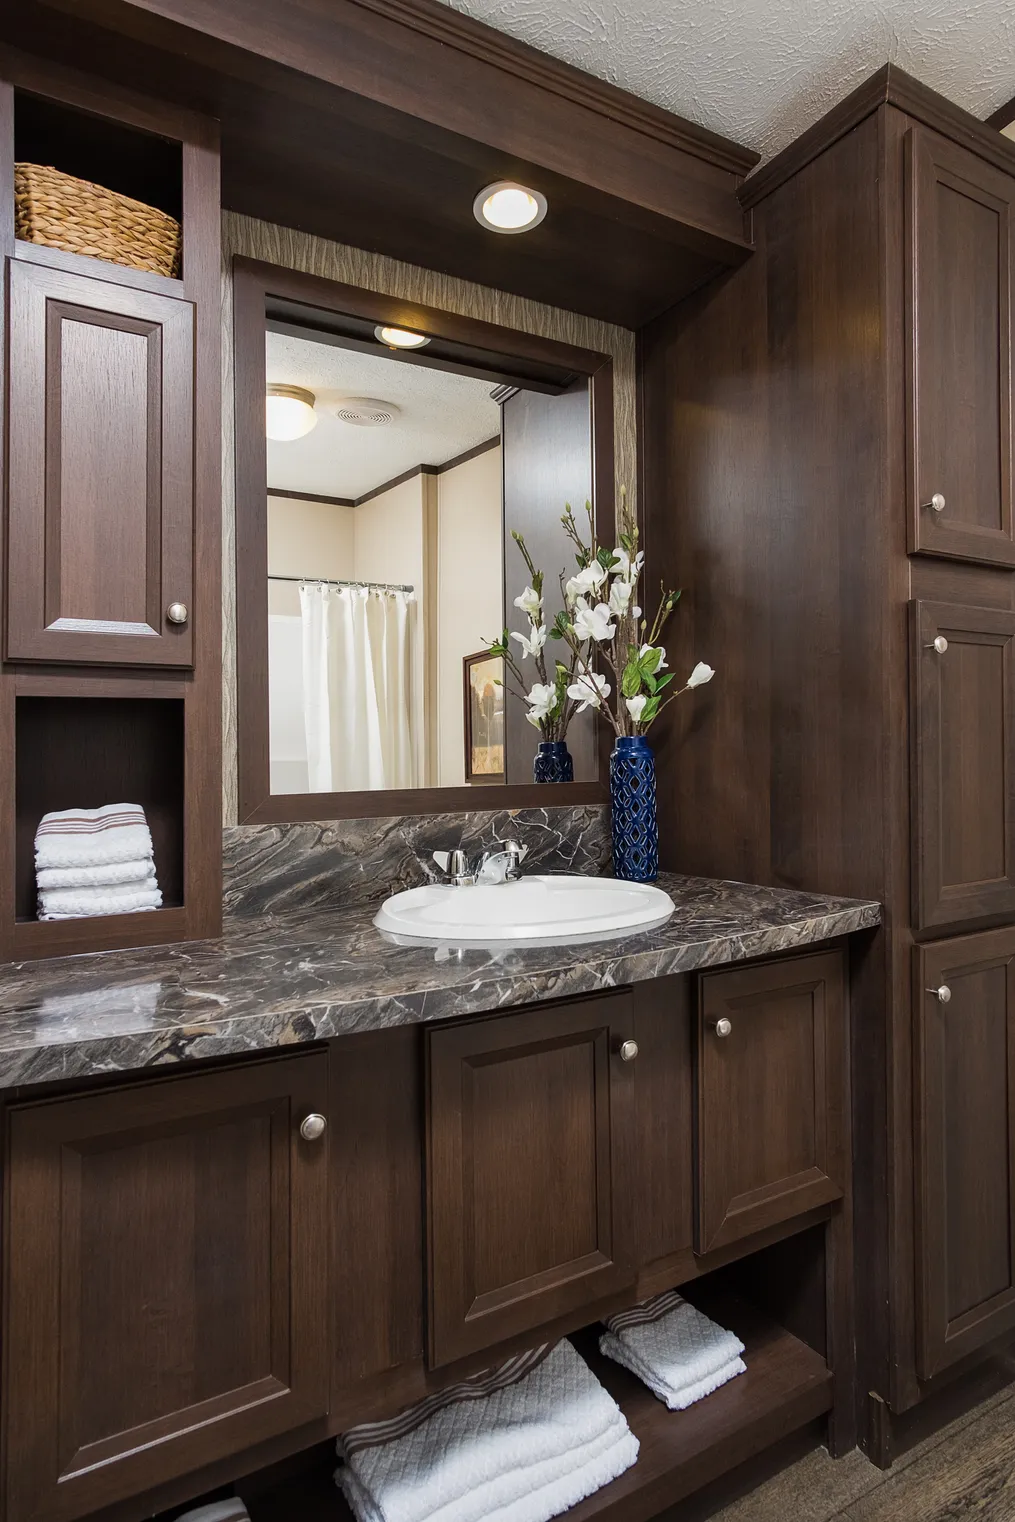 The ADIRONDACK 3628-236 Primary Bathroom. This Manufactured Mobile Home features 2 bedrooms and 1 bath.